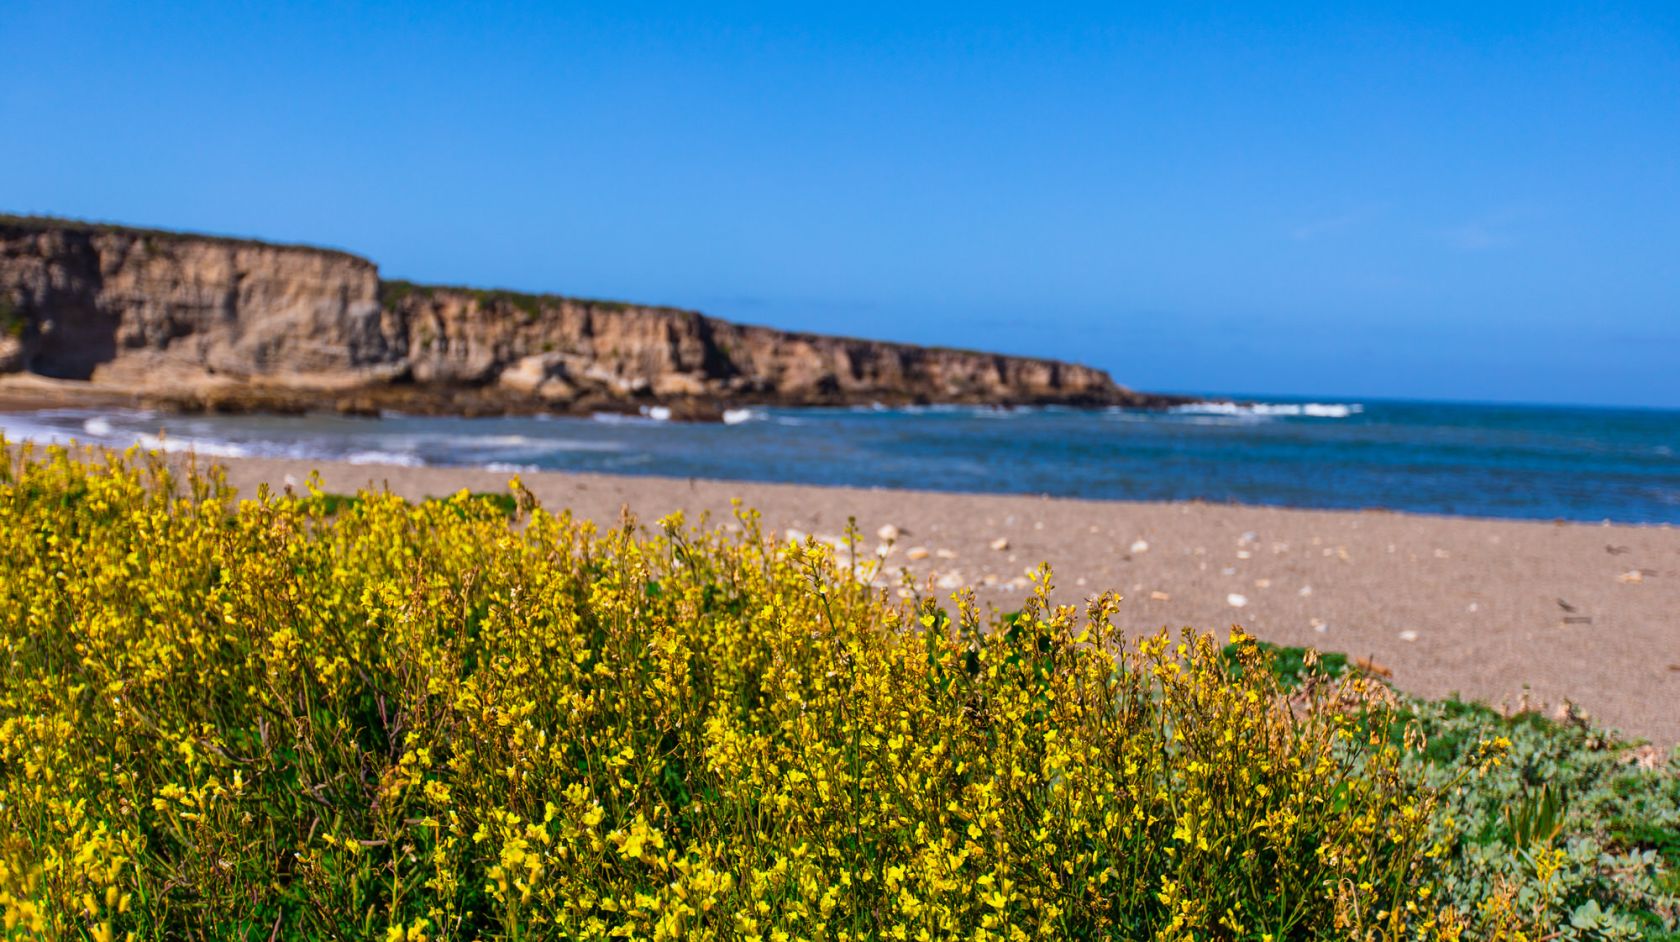 A Beach With Yellow Flowers